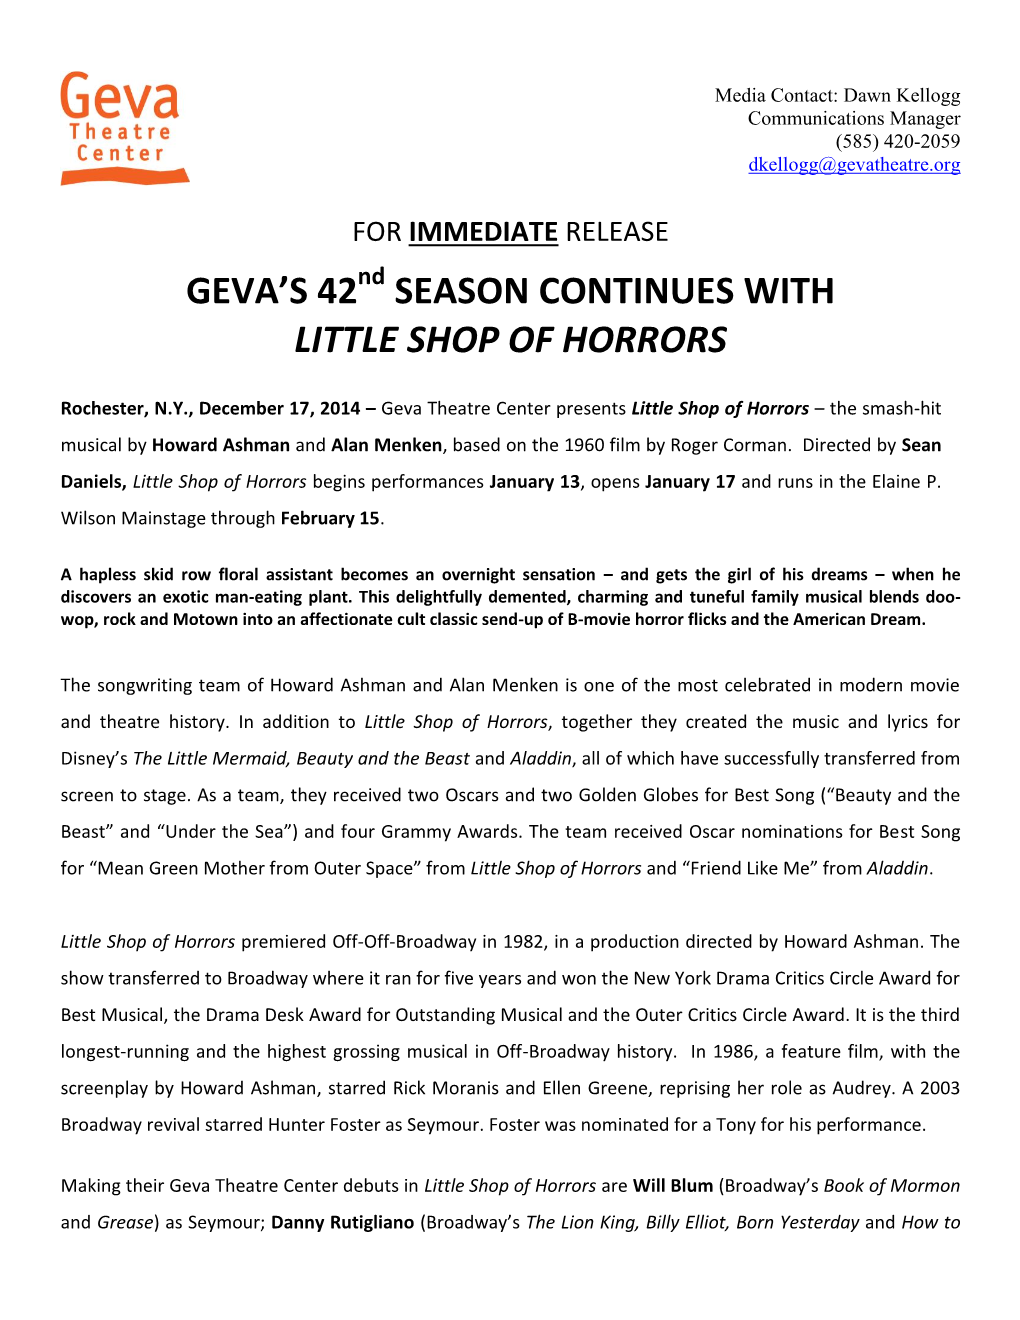 Geva's 42 Season Continues with Little Shop of Horrors